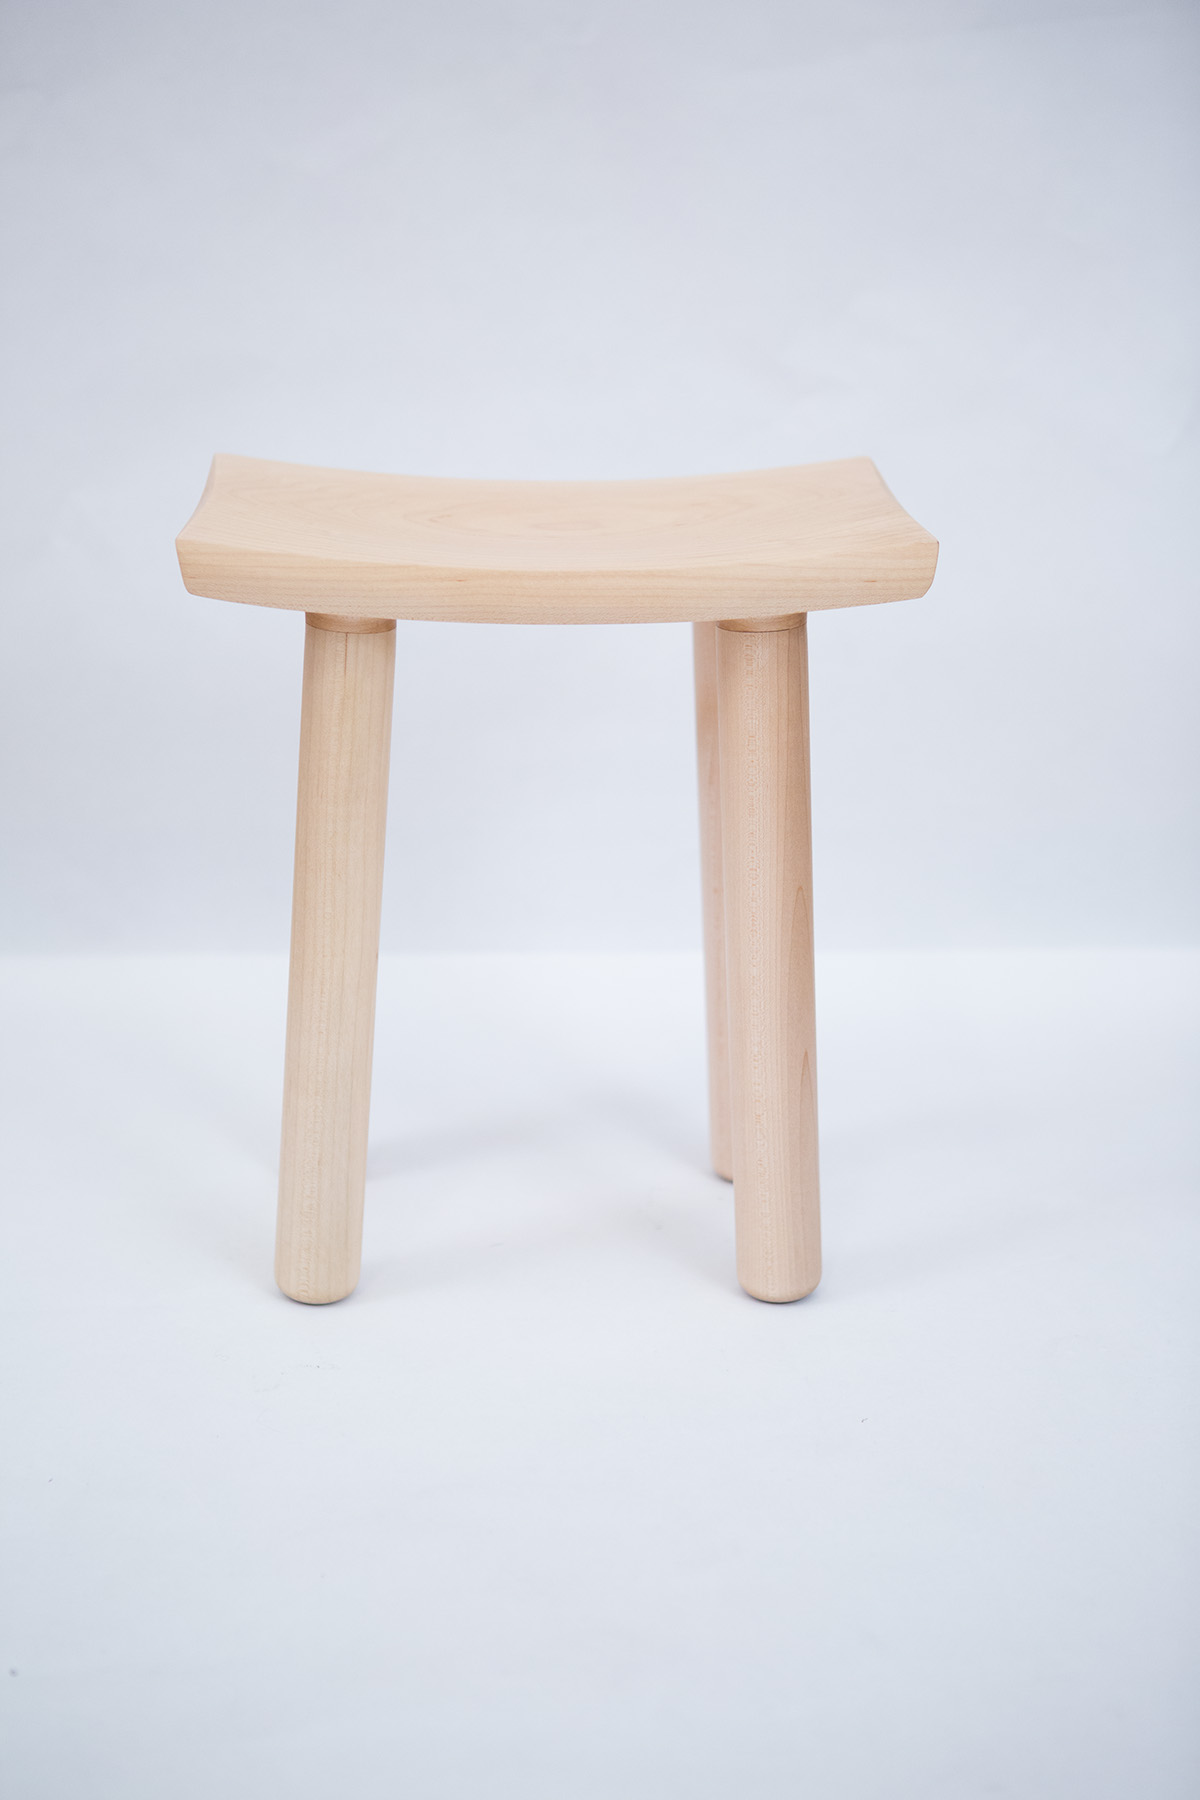 furniture cnc stool maple CNC Router furniture drawing 3d modeling Solidworks